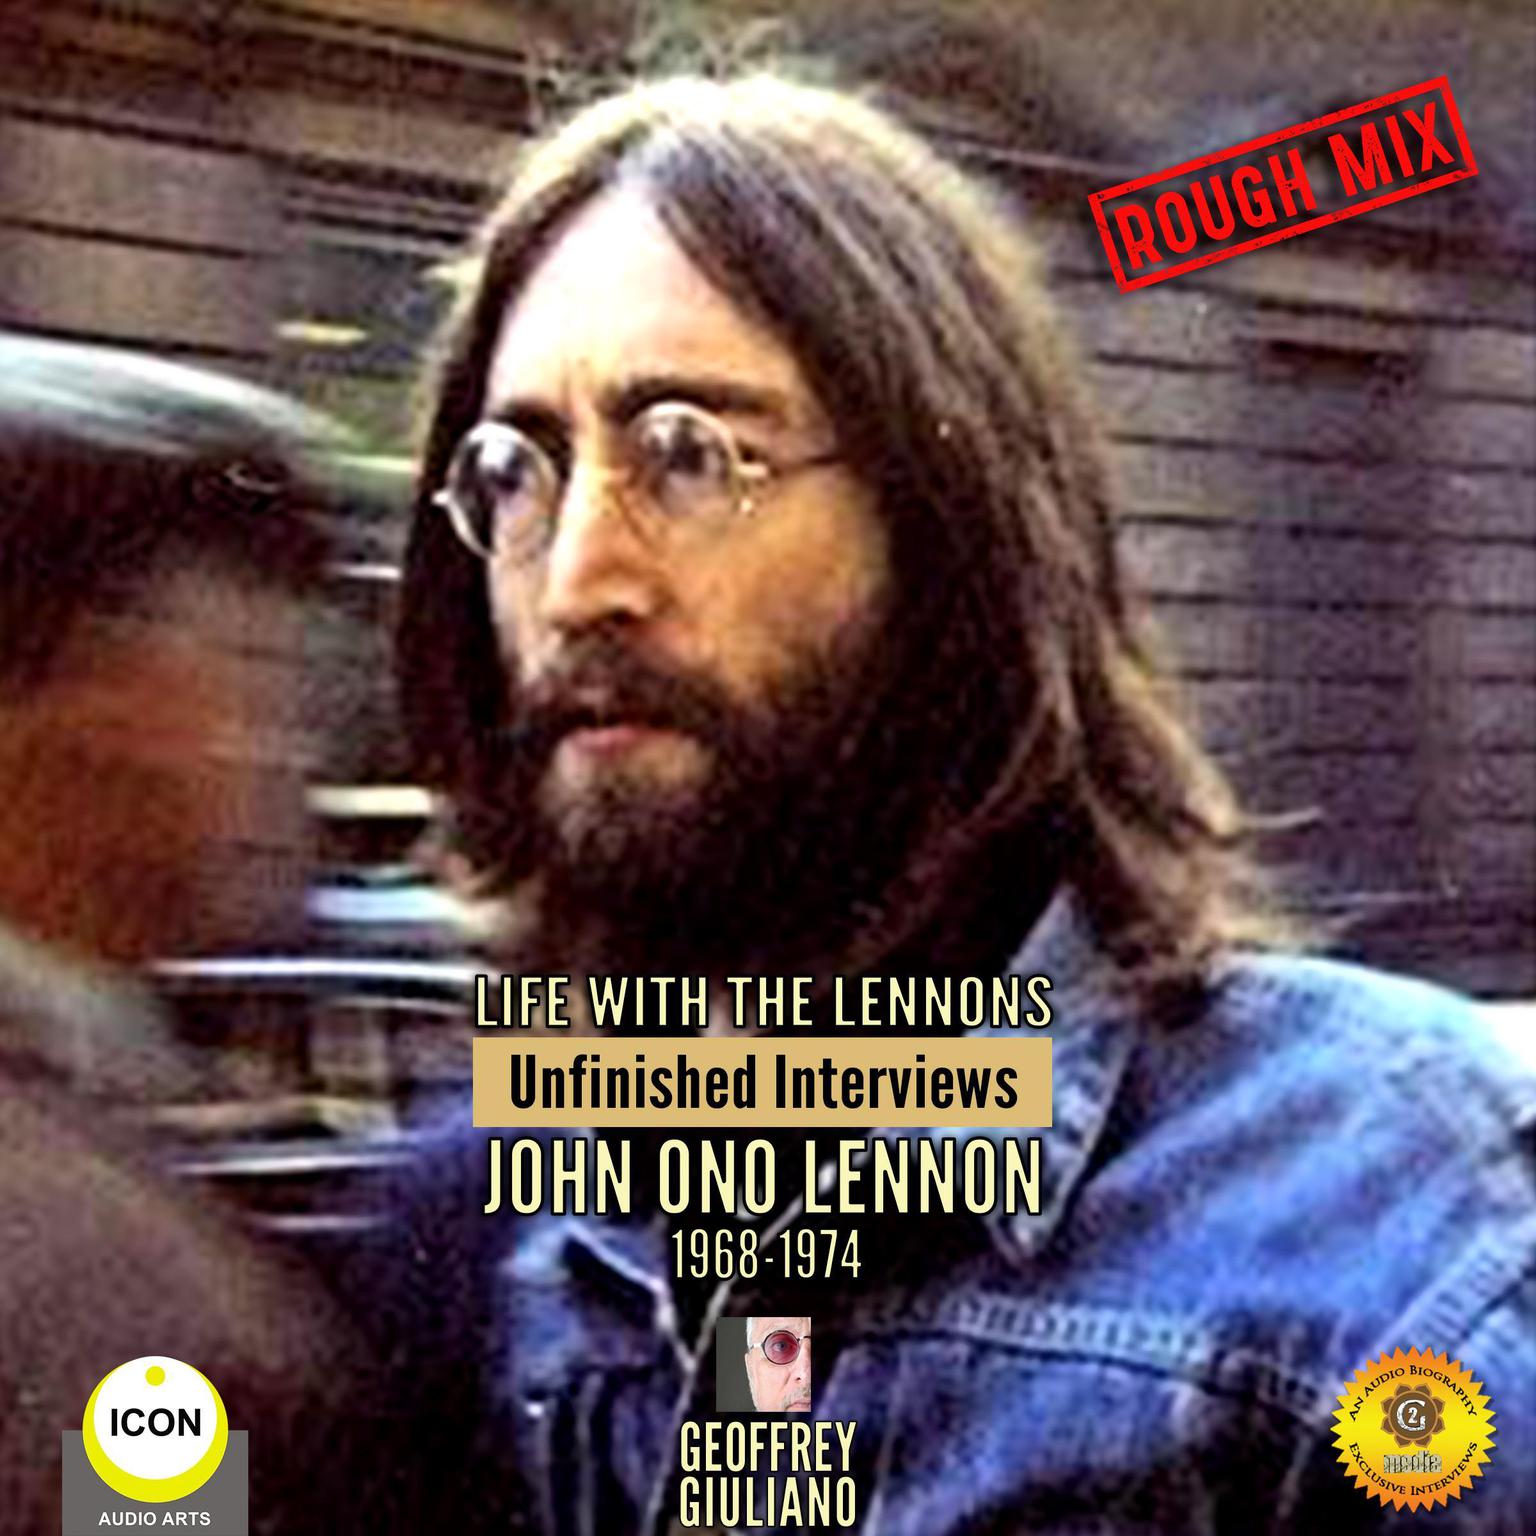 Life with the Lennons: Unfinished Interviews John Ono Lennon 1968-1974 Audiobook, by Geoffrey Giuliano